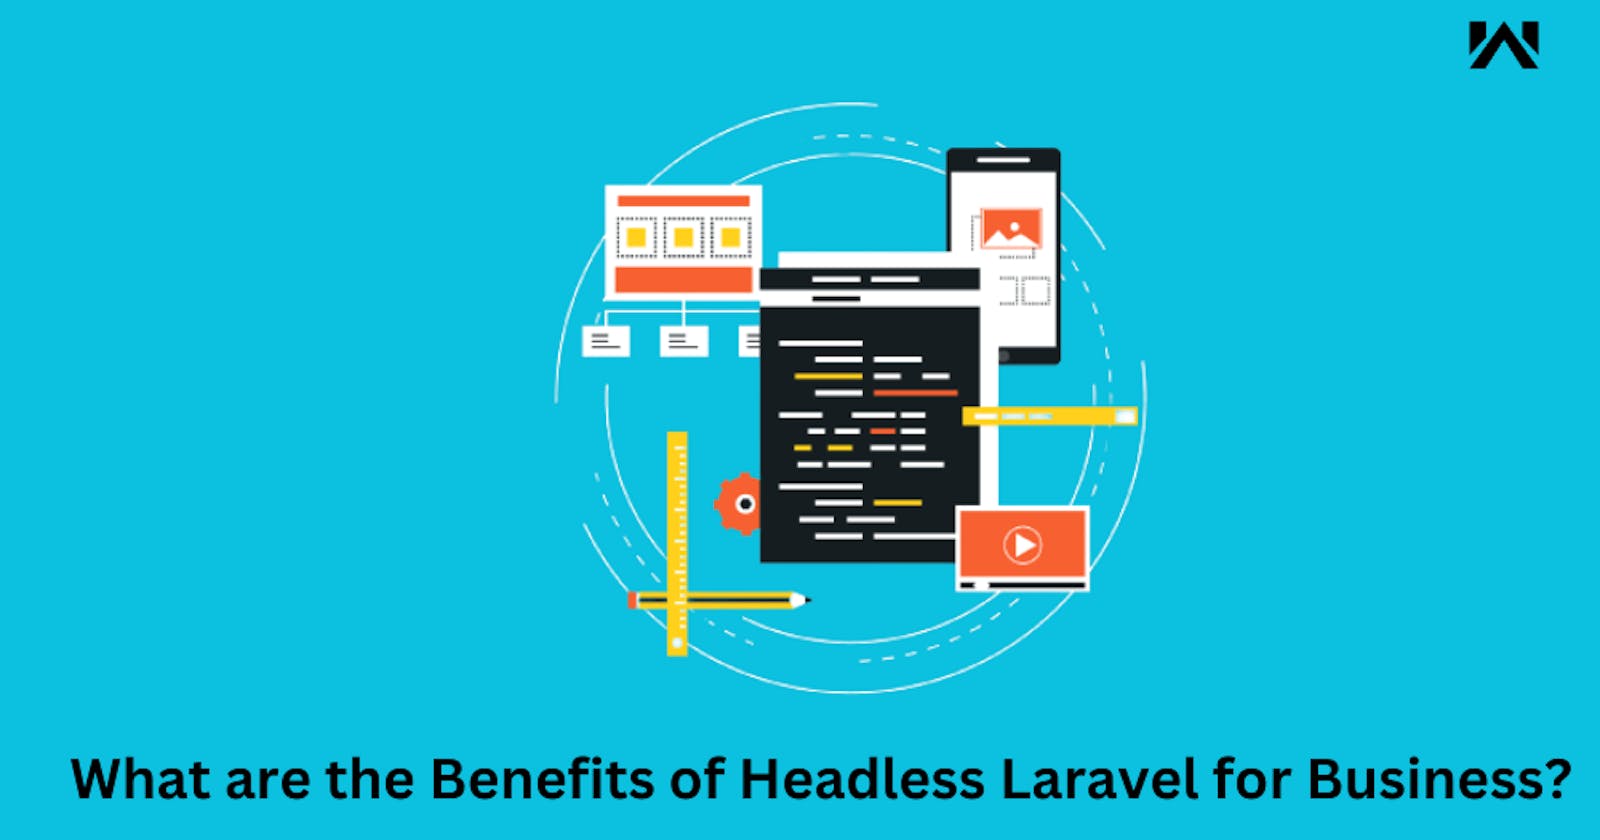 What are the Benefits of Headless Laravel for Business?